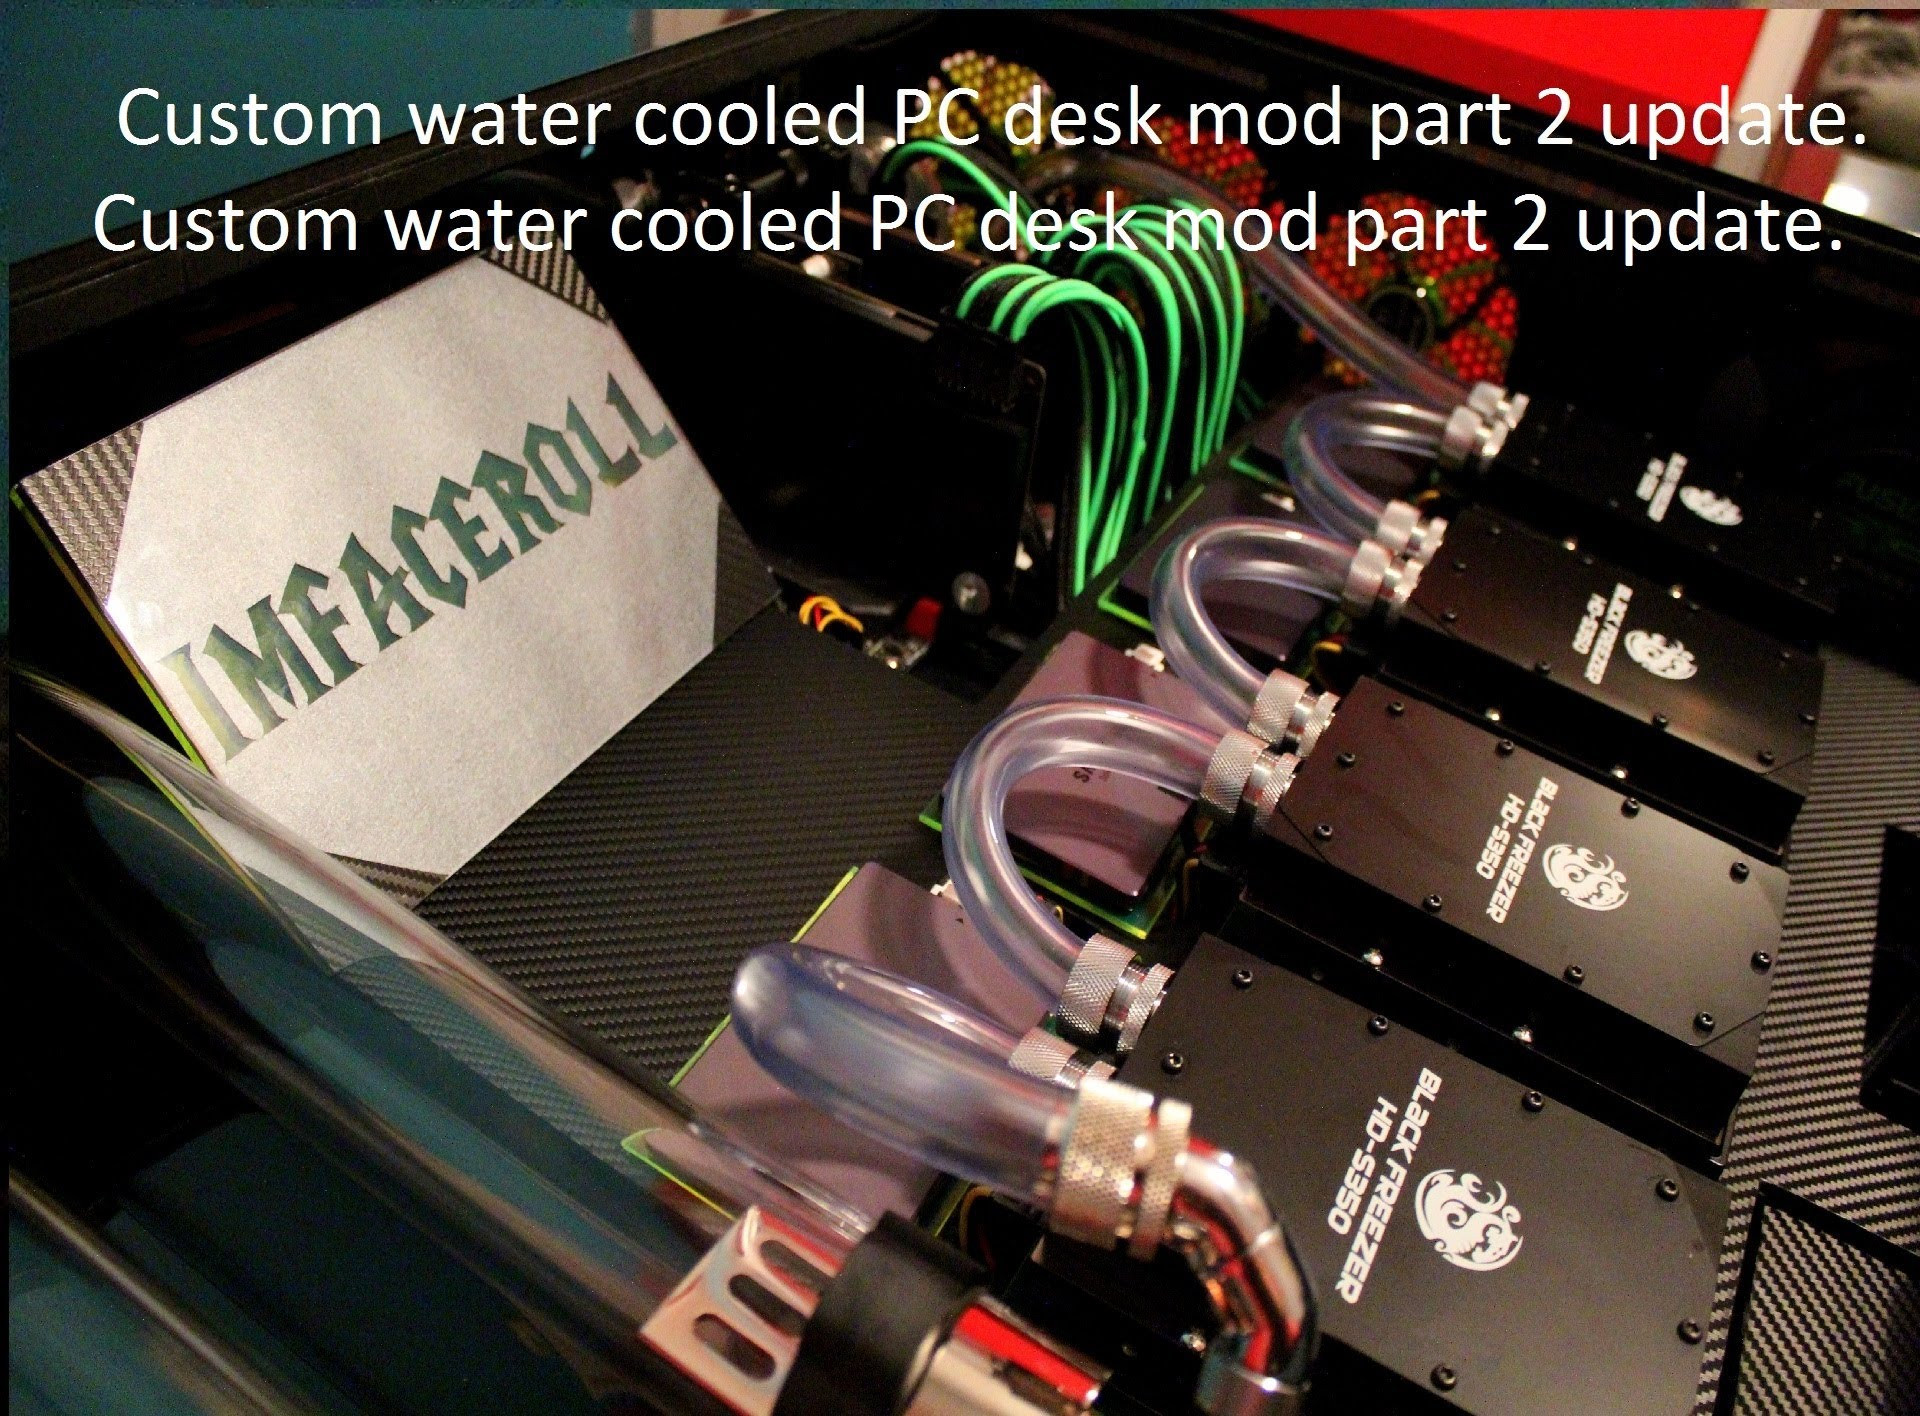 custom-water-cooled-pc-desk-mod-puter-within-a-desk-part-2-update-scheme-of-diy-gaming-compute...jpg